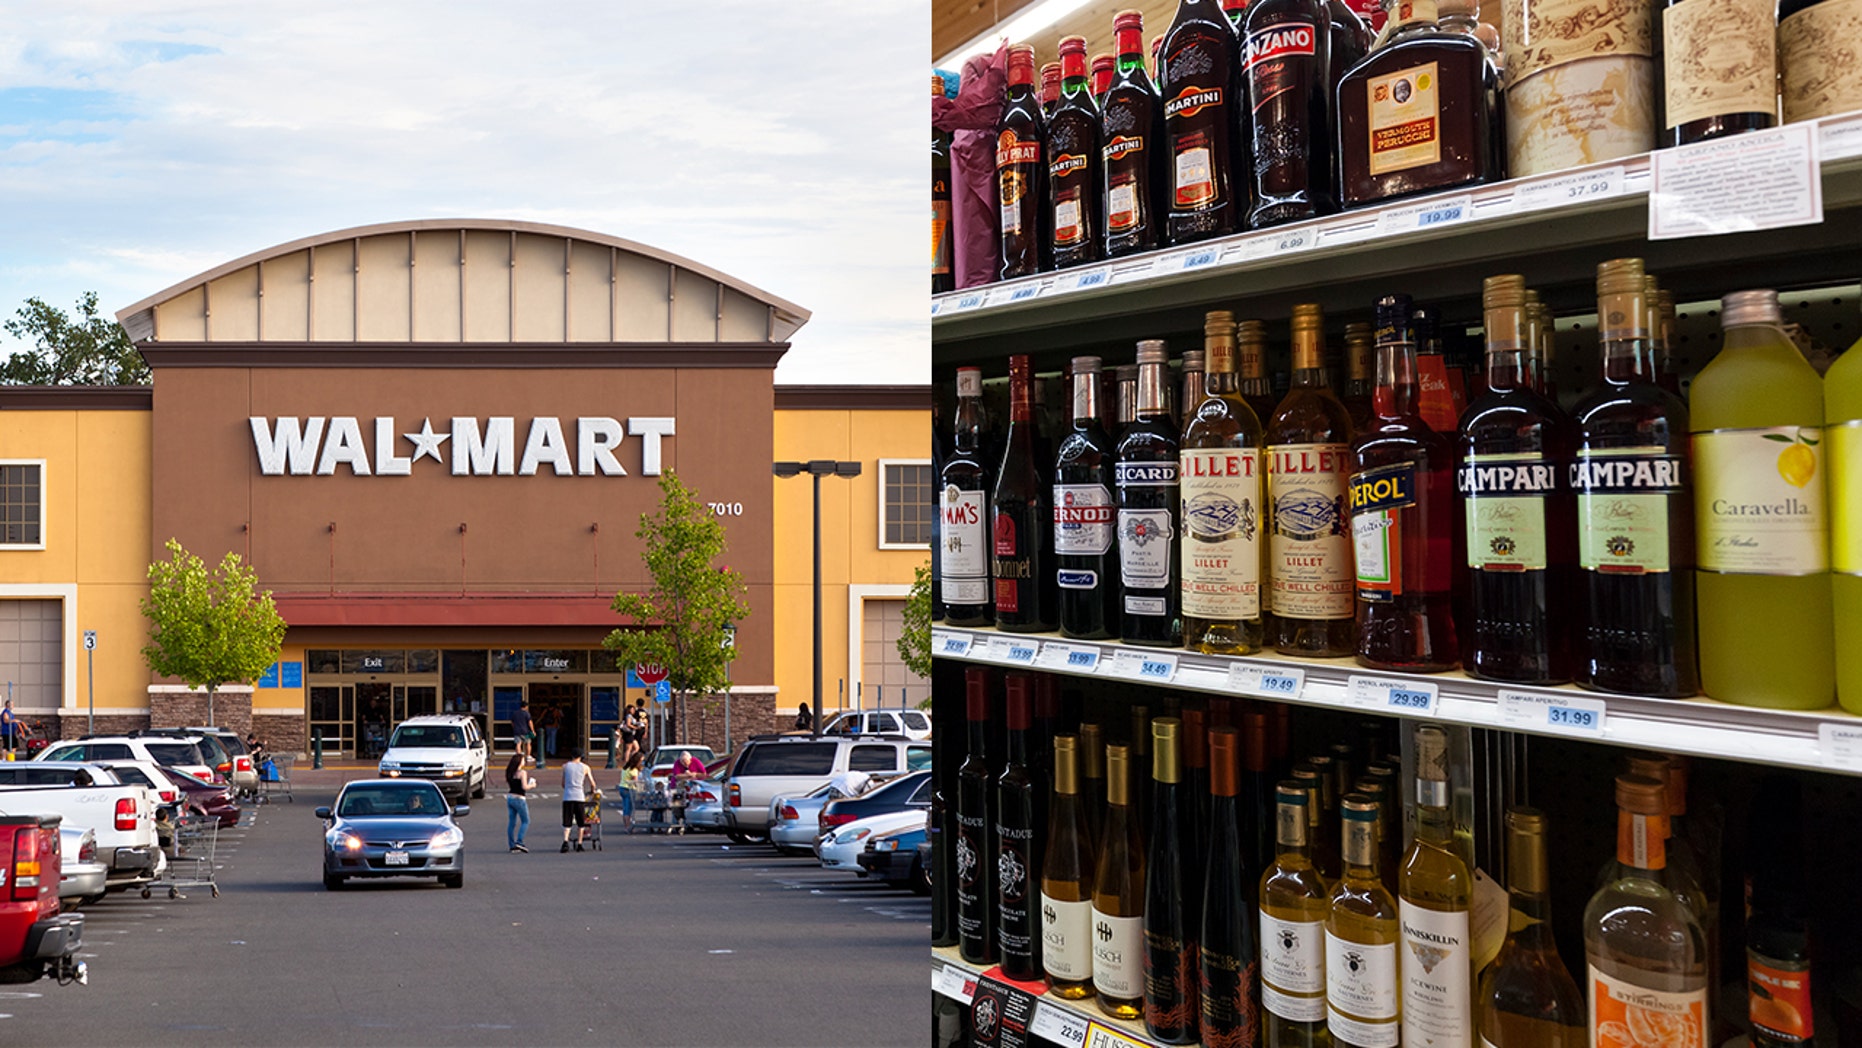 Walmart Costco Target In Texas Won The Right To Sell Liquor But Some Are Fighting To Appeal Fox News